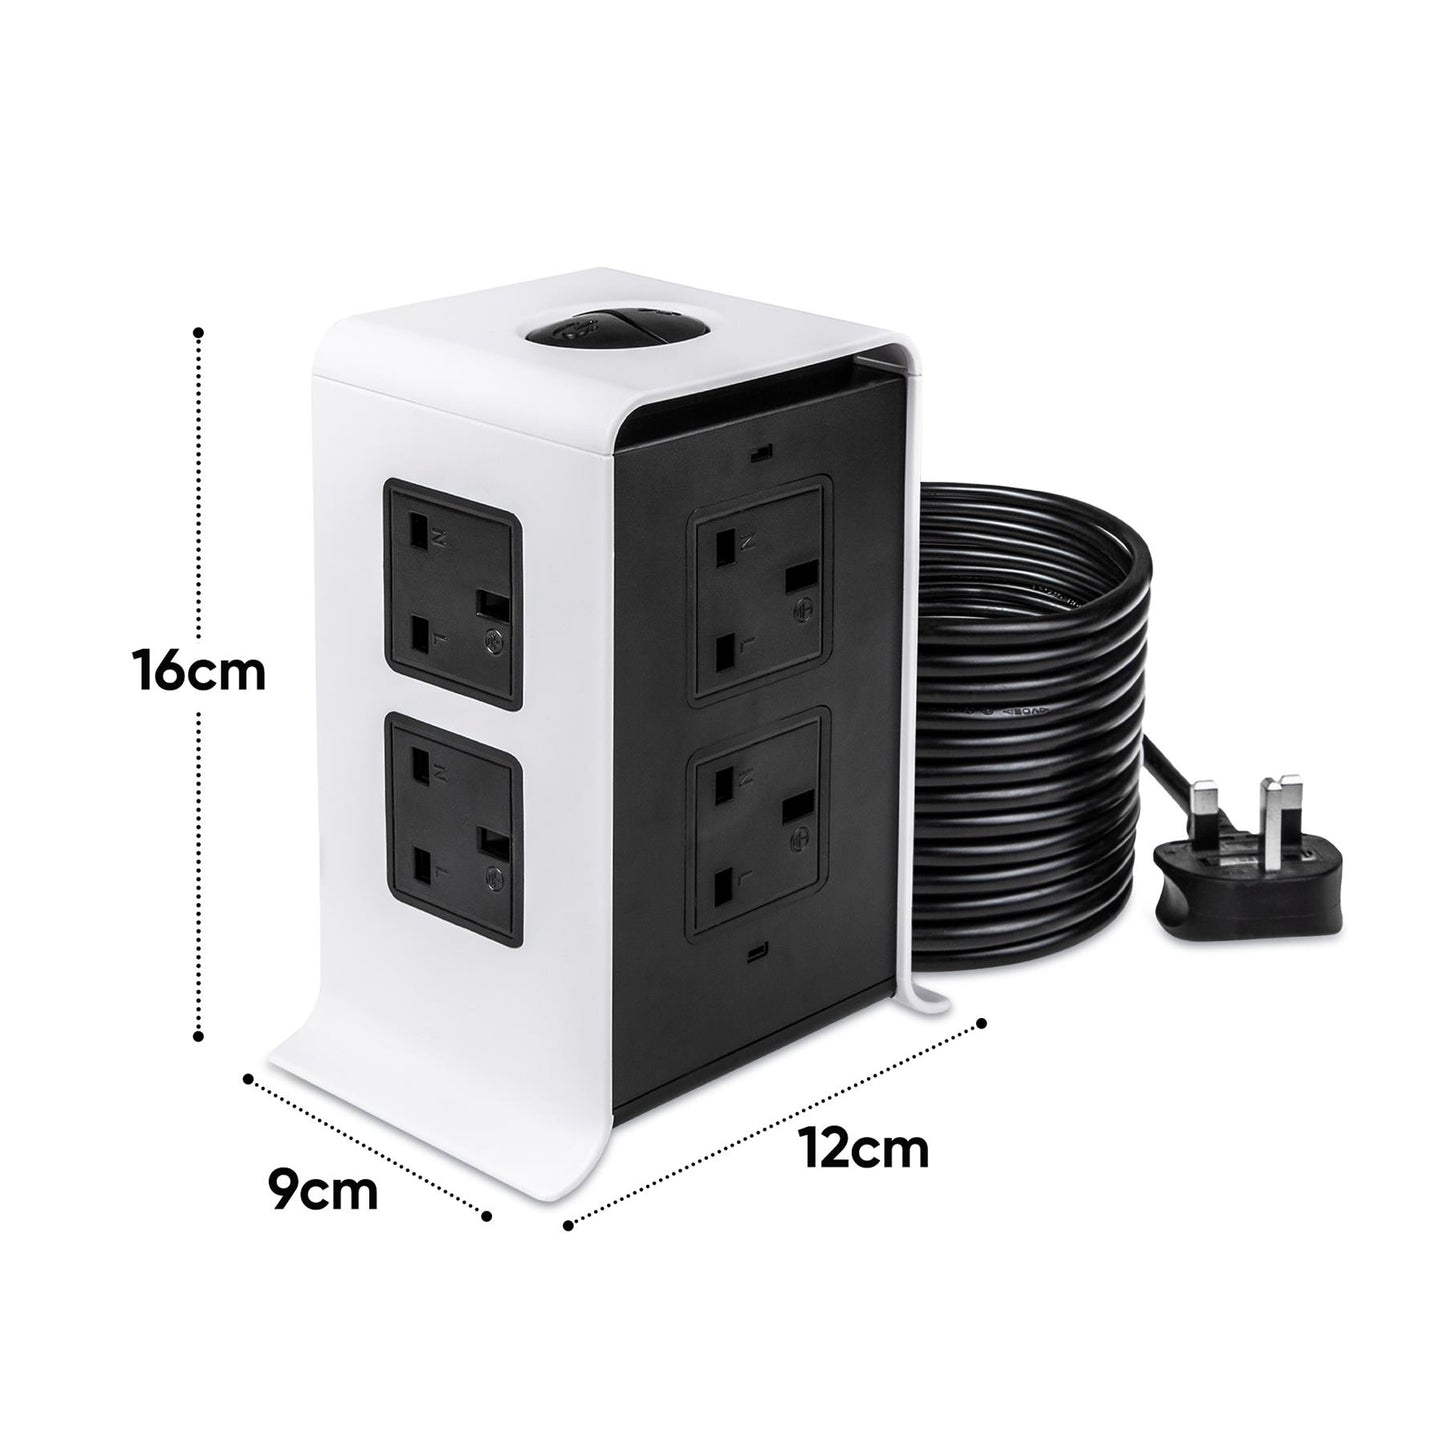 8 Outlet Extension Lead With 4 Usb Ports And 5M Cable